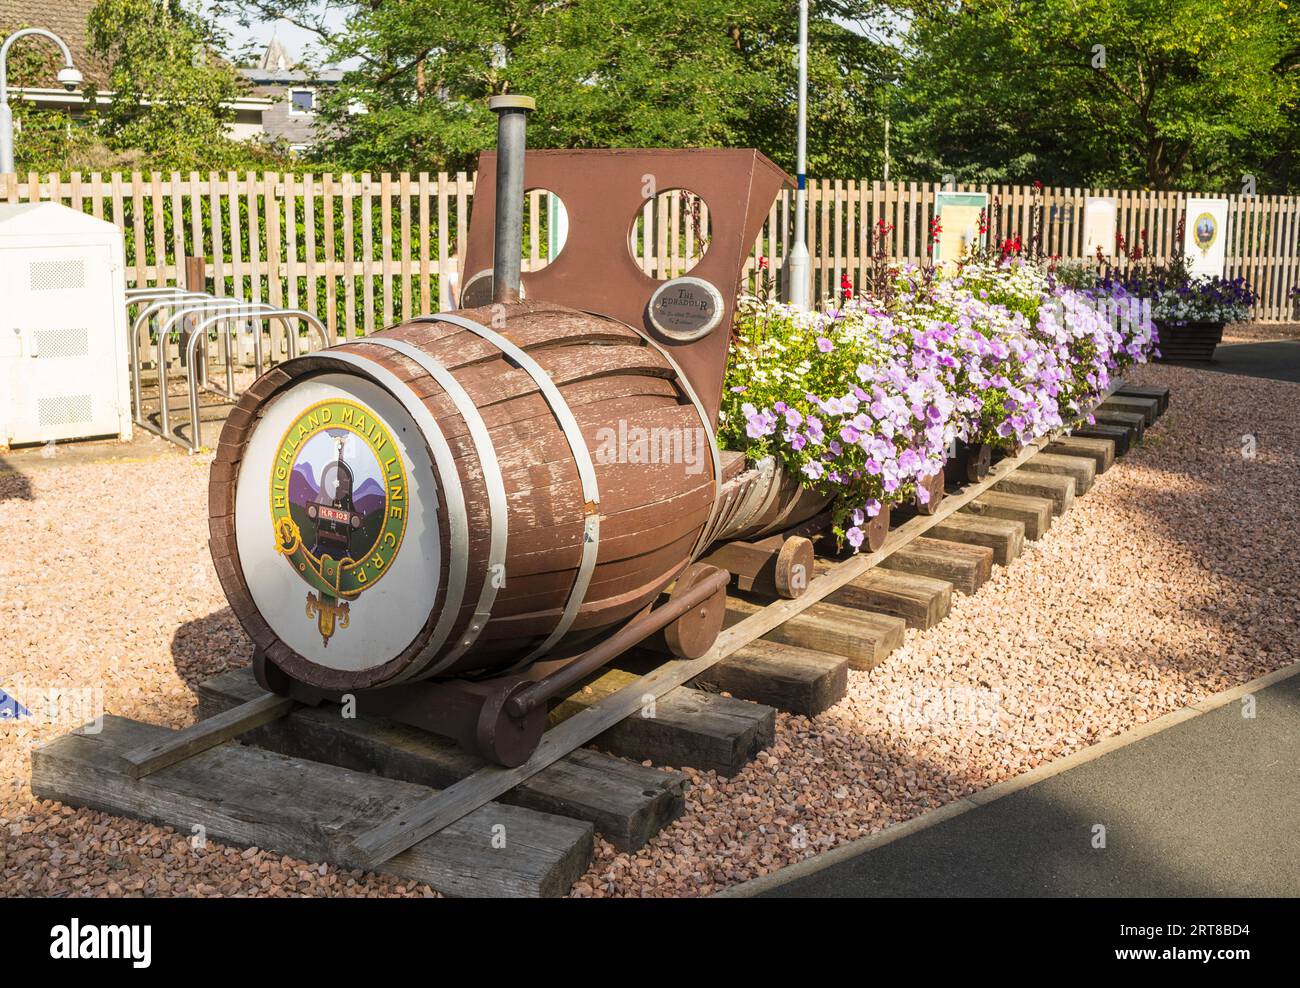 A floral train at Pitlochry railway station, Scotland, UK Stock Photo